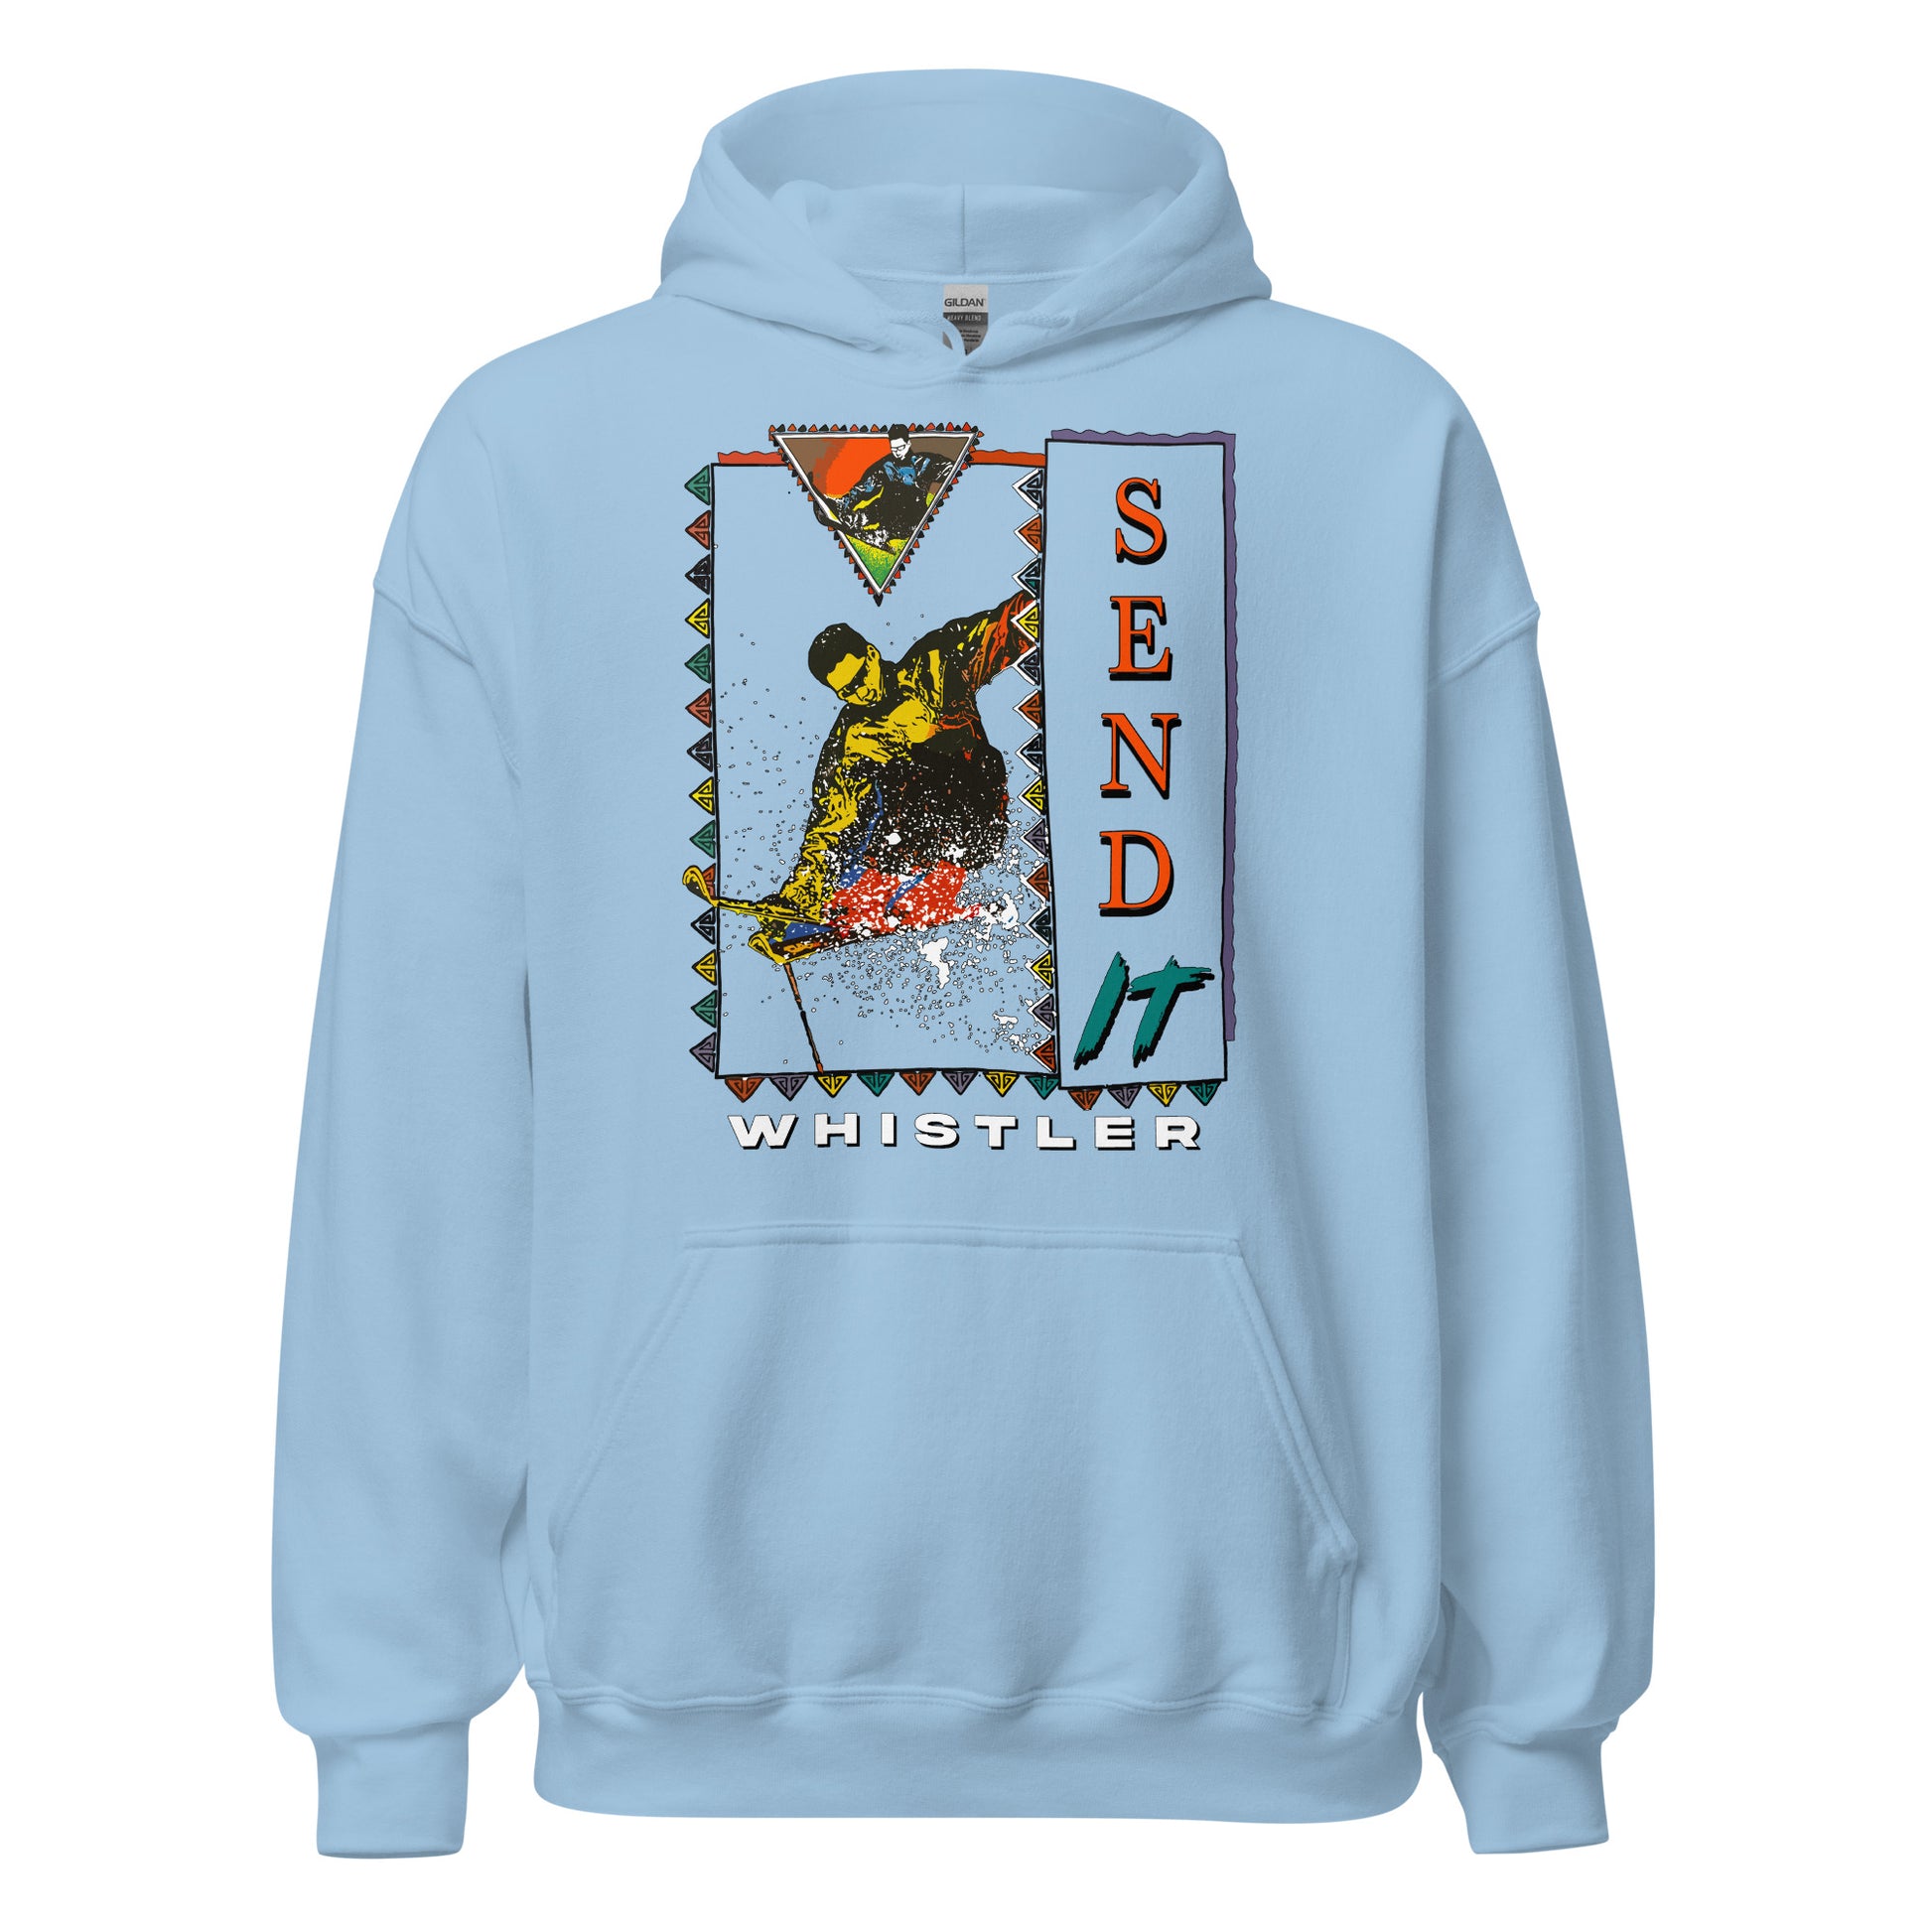 Send it Whistler printed hoodie by Whistler Shirts